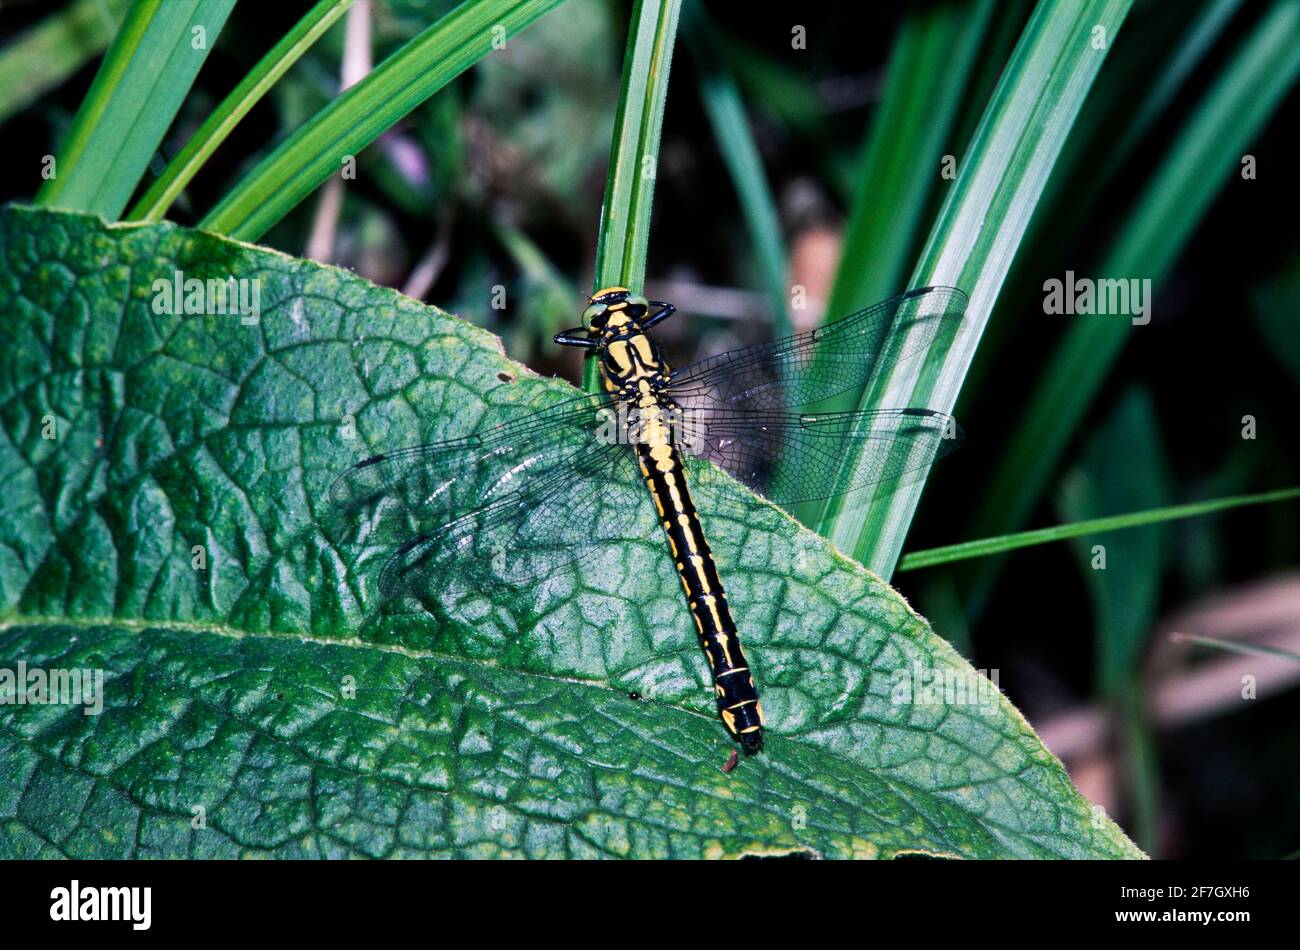 Dragonfly, Damselfly part II, in the natural environment in Hertfordshire Middlesex UK Stock Photo